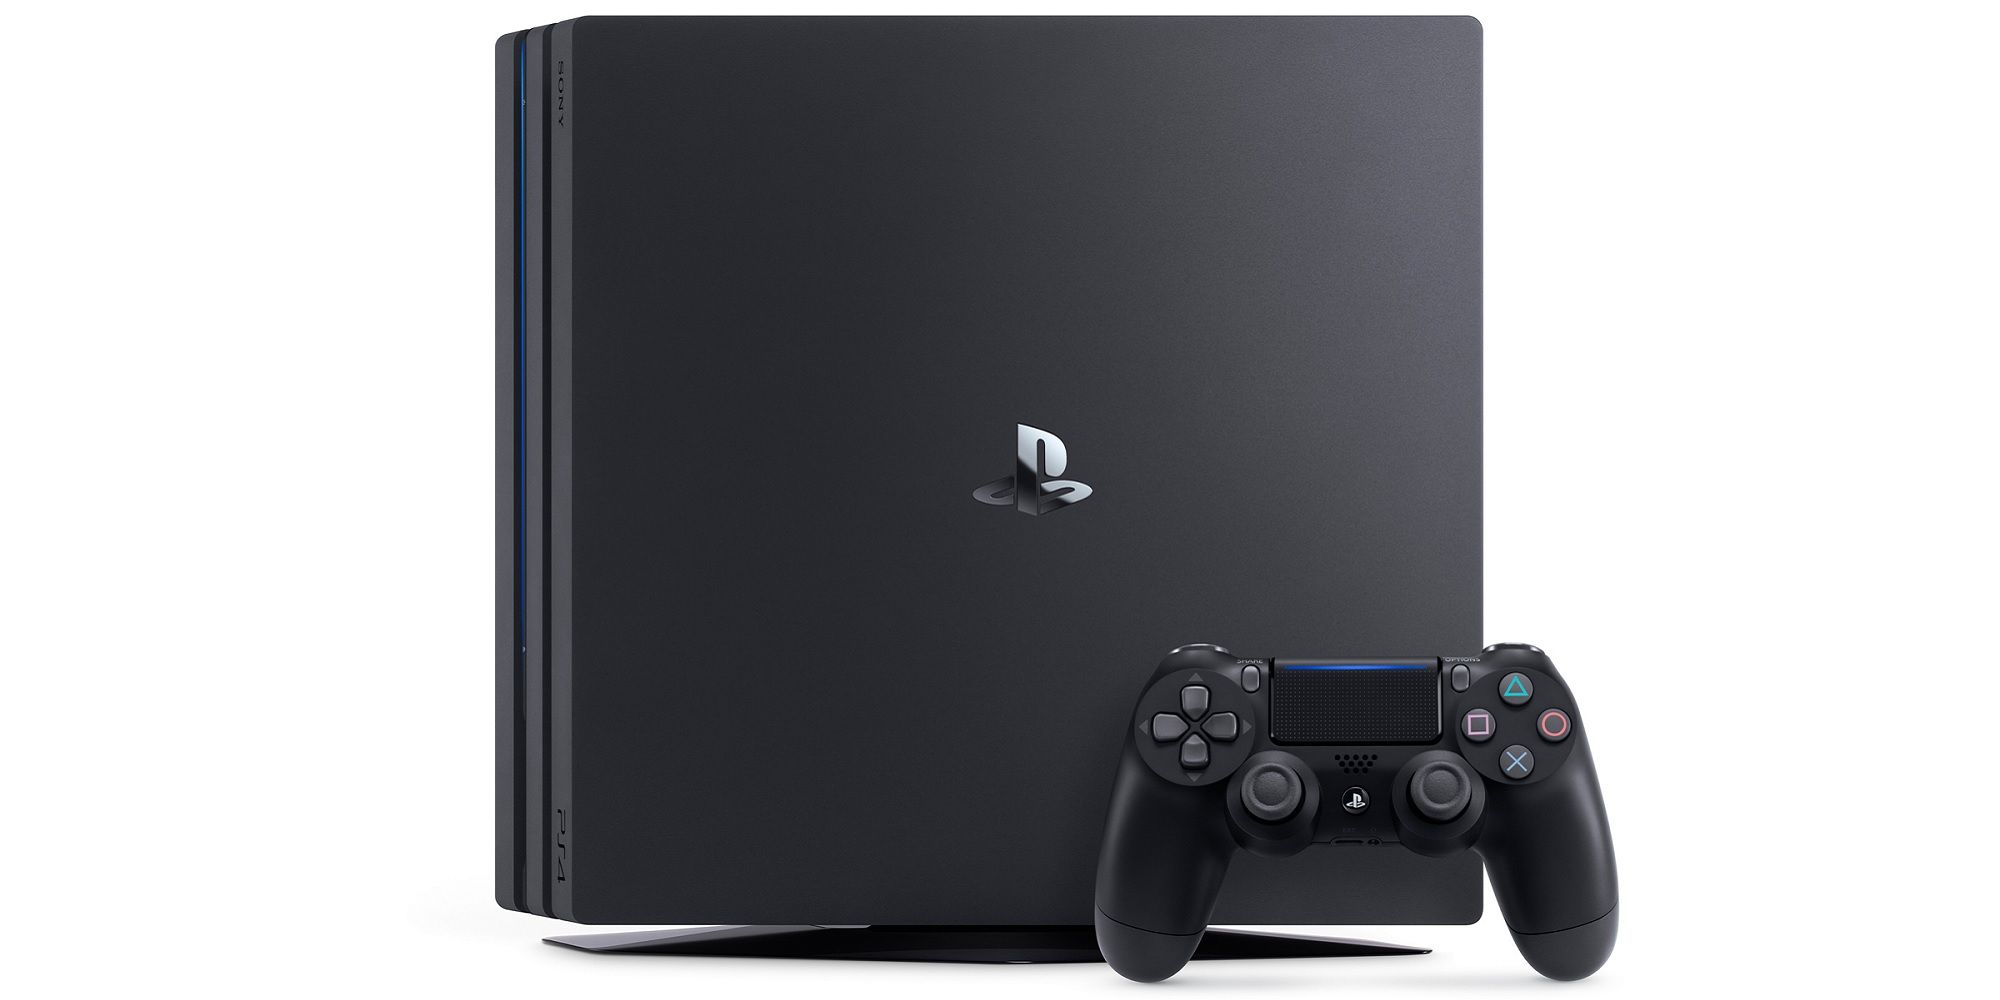 PS4 Pro with DualShock controller